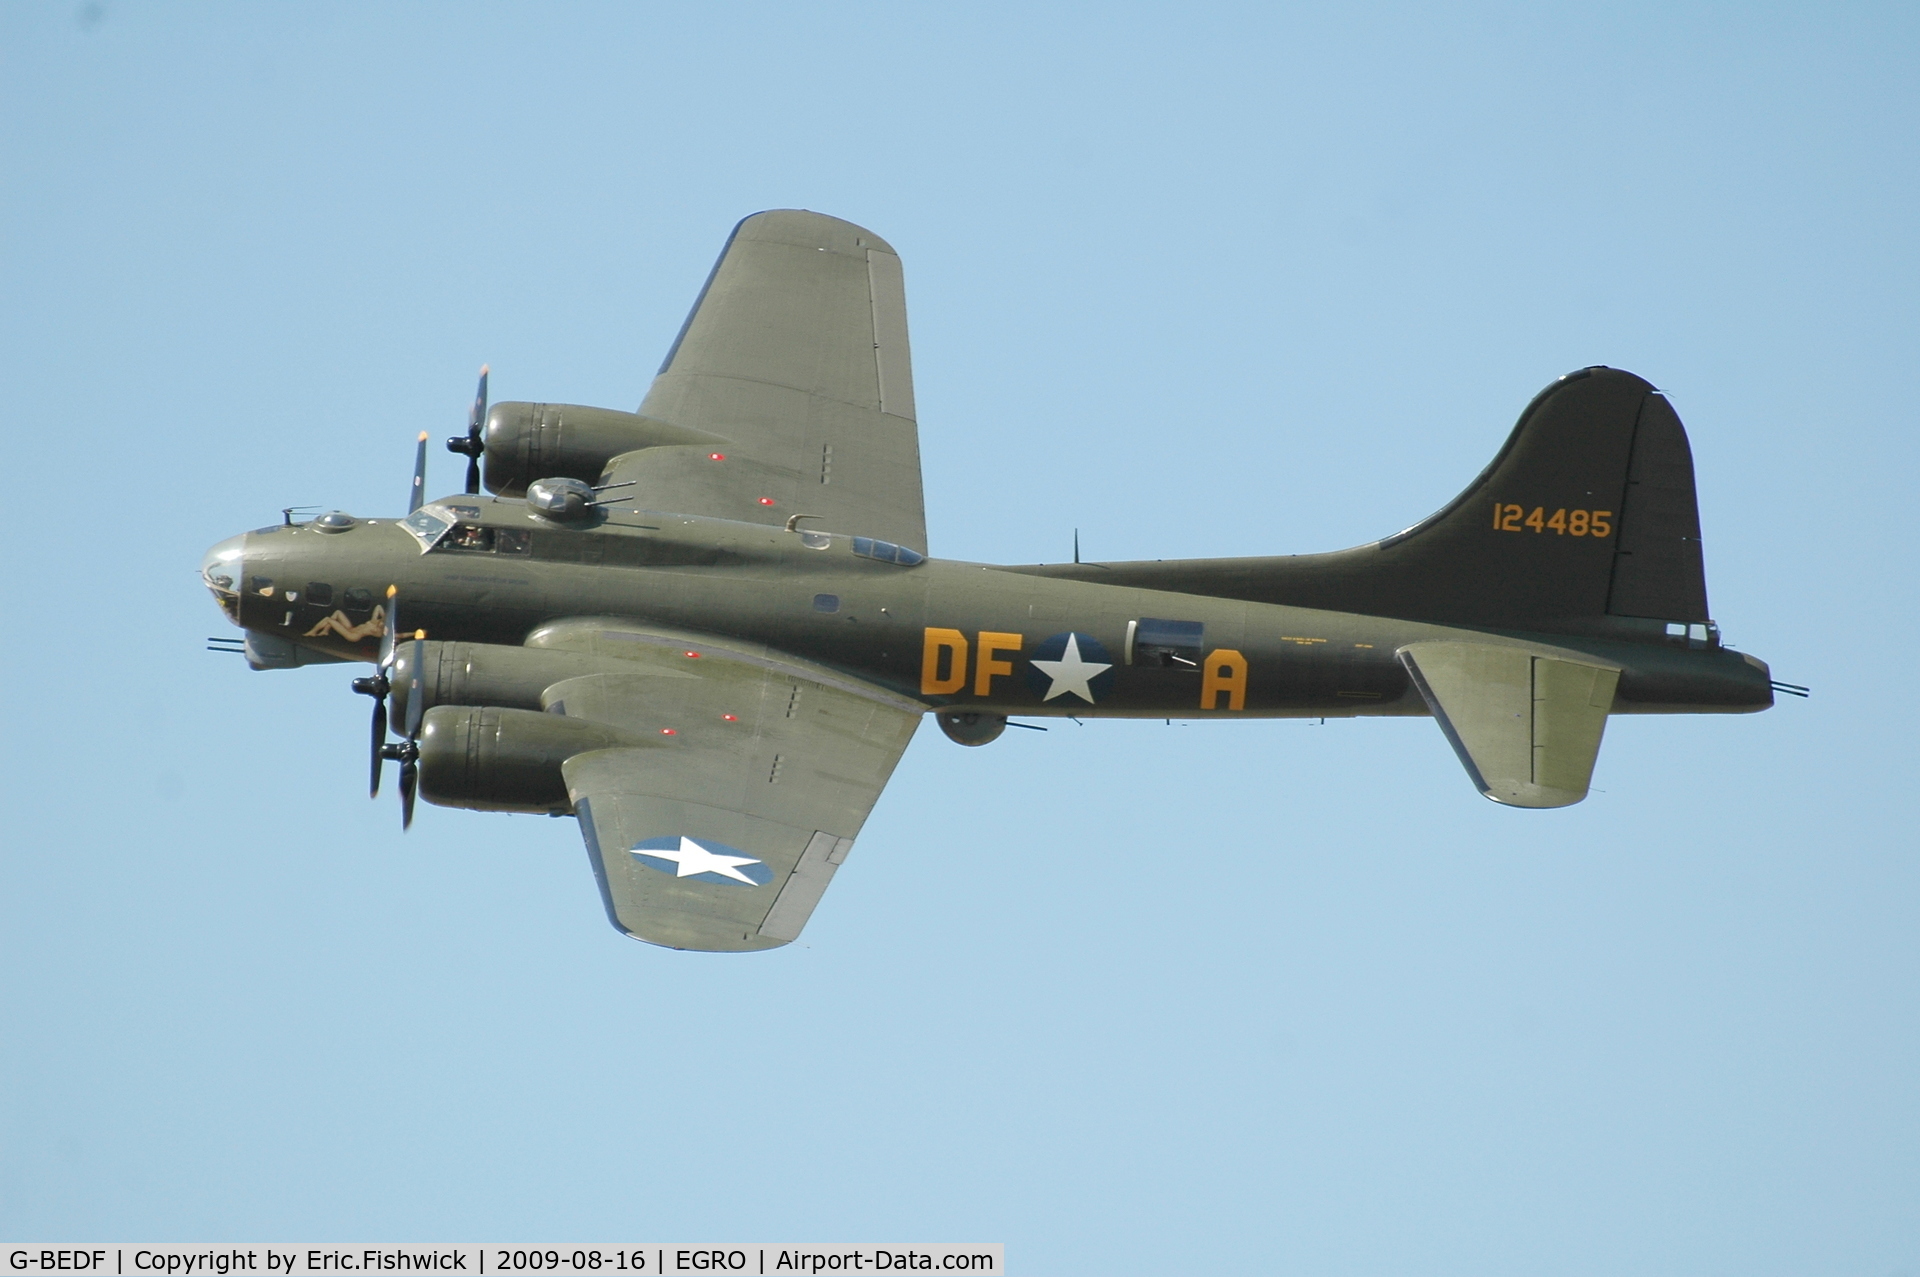 G-BEDF, 1944 Boeing B-17G Flying Fortress C/N 8693, Sally B at Heart Air Display, Rougham Airfield Aug 09